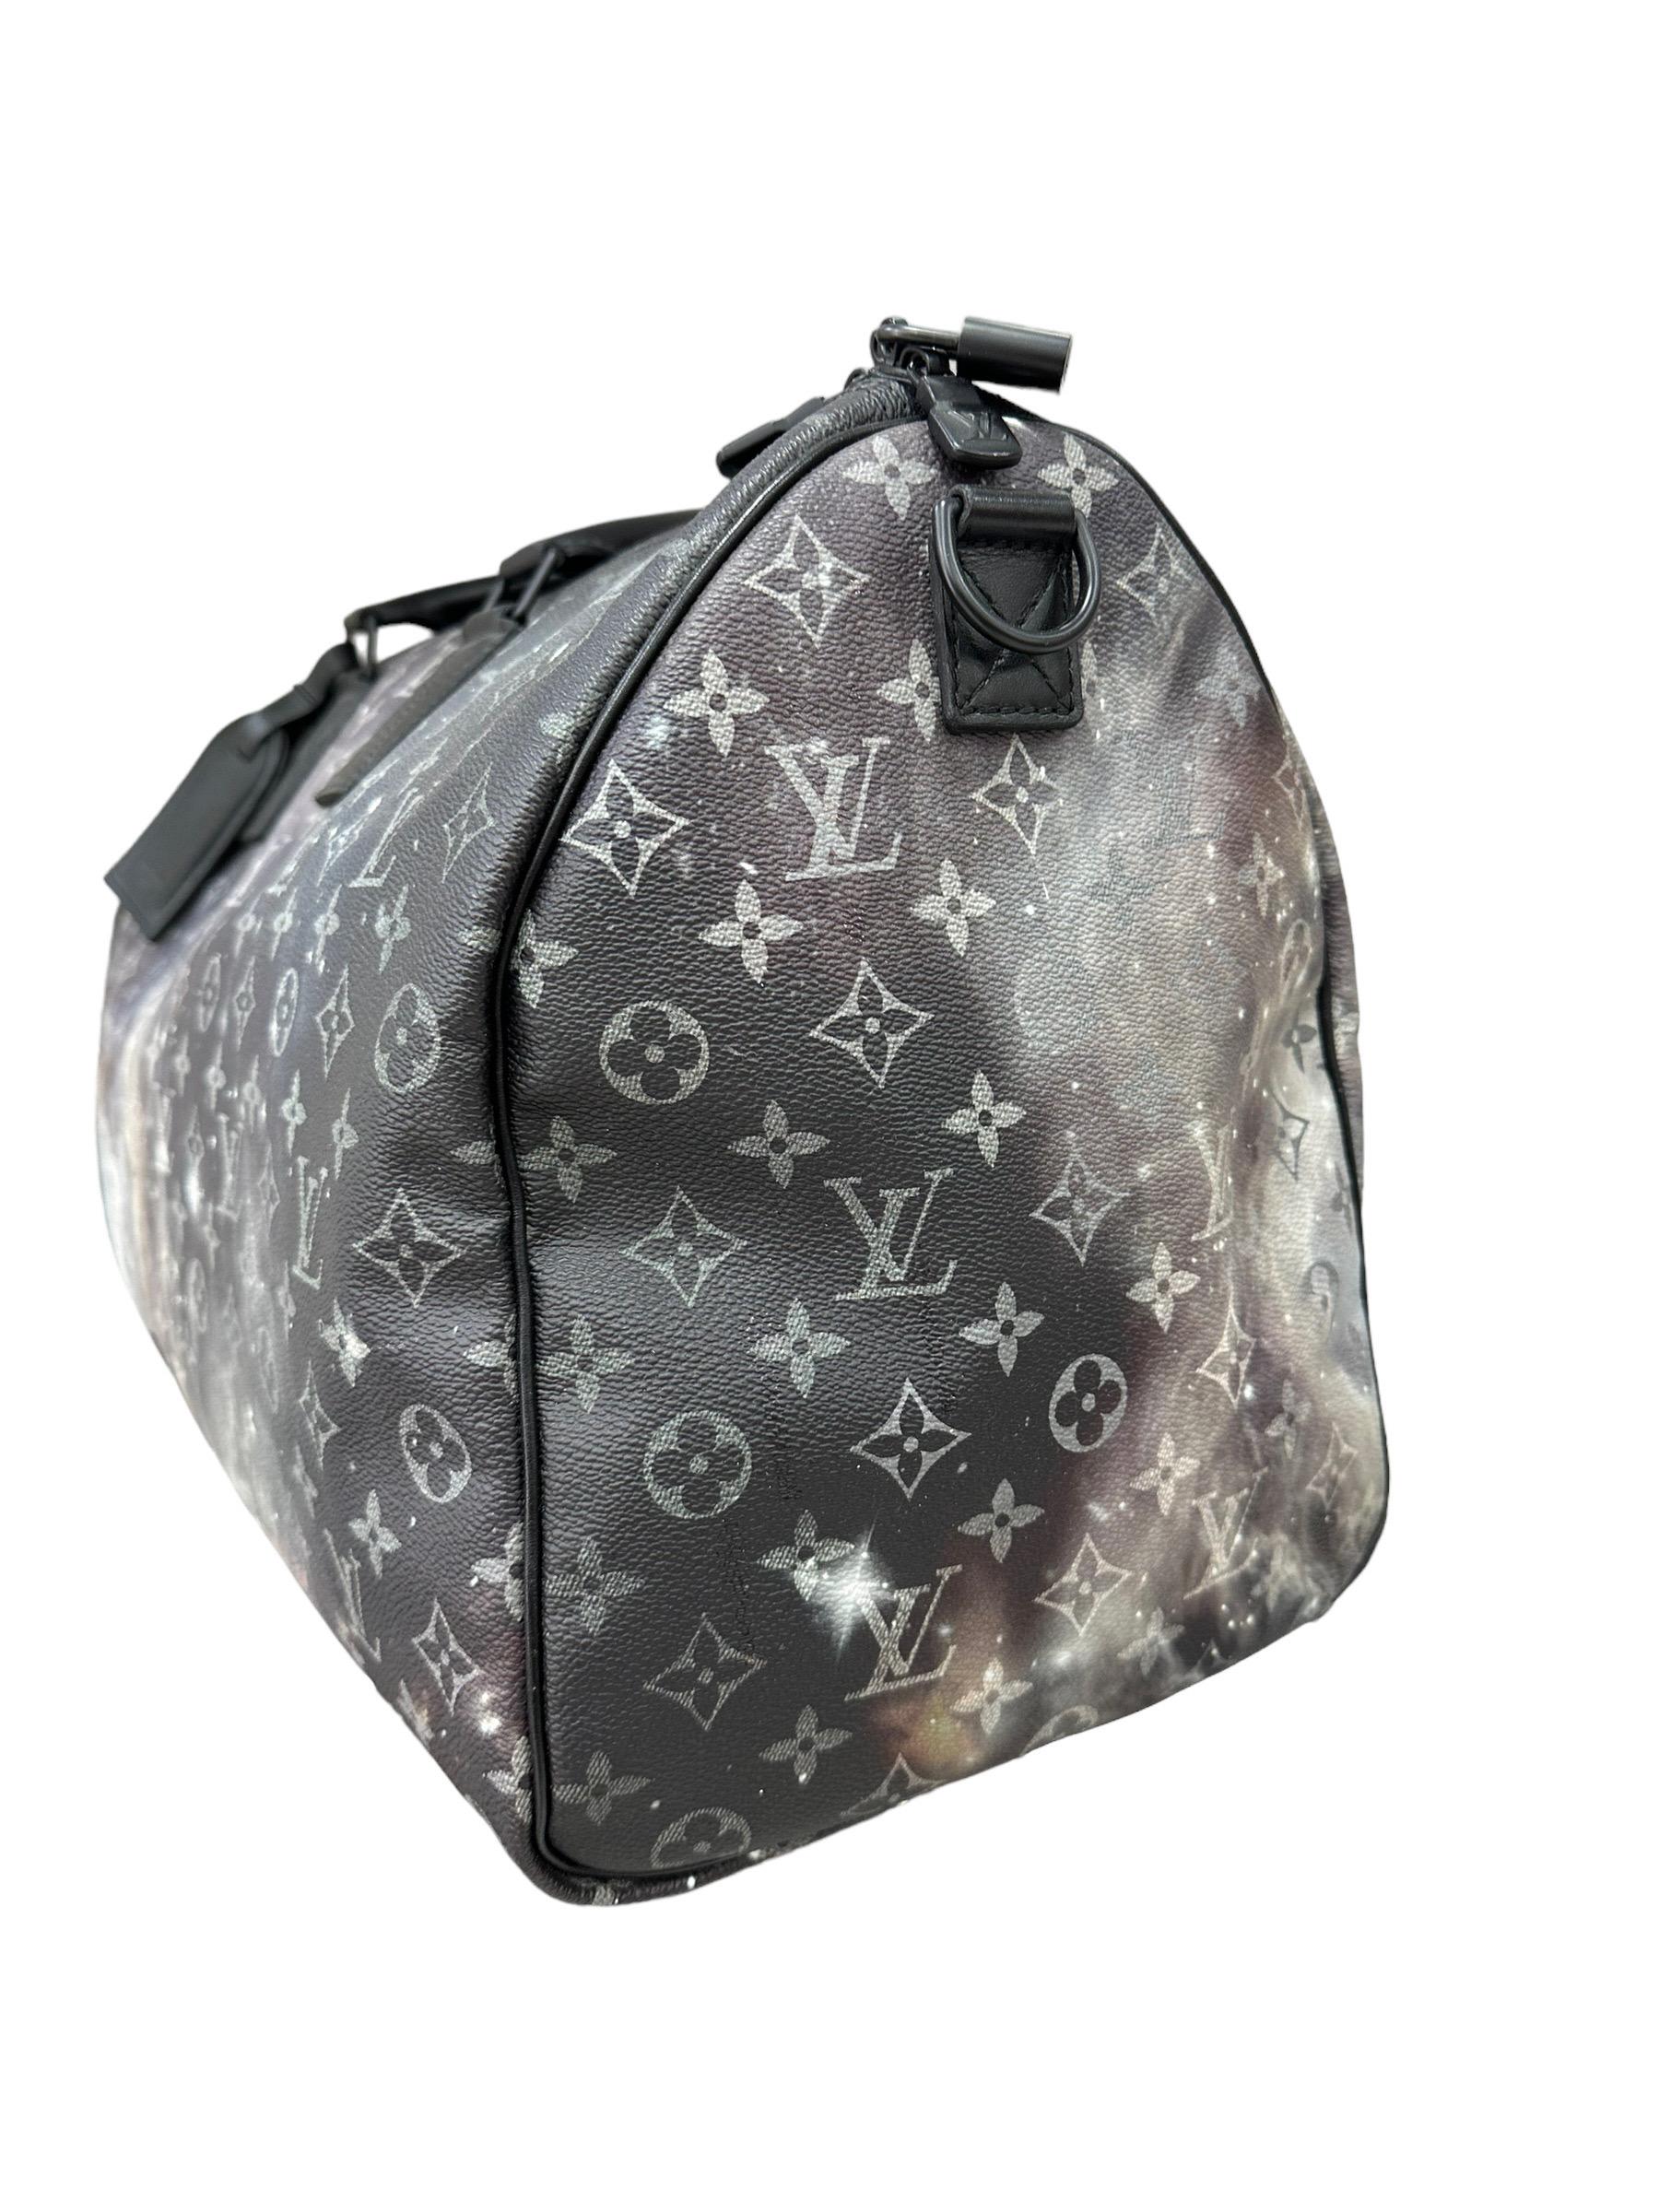 Louis Vuitton Galaxy Keepall Bandouliere 50 Limited Edition Travel Bag For Sale 3